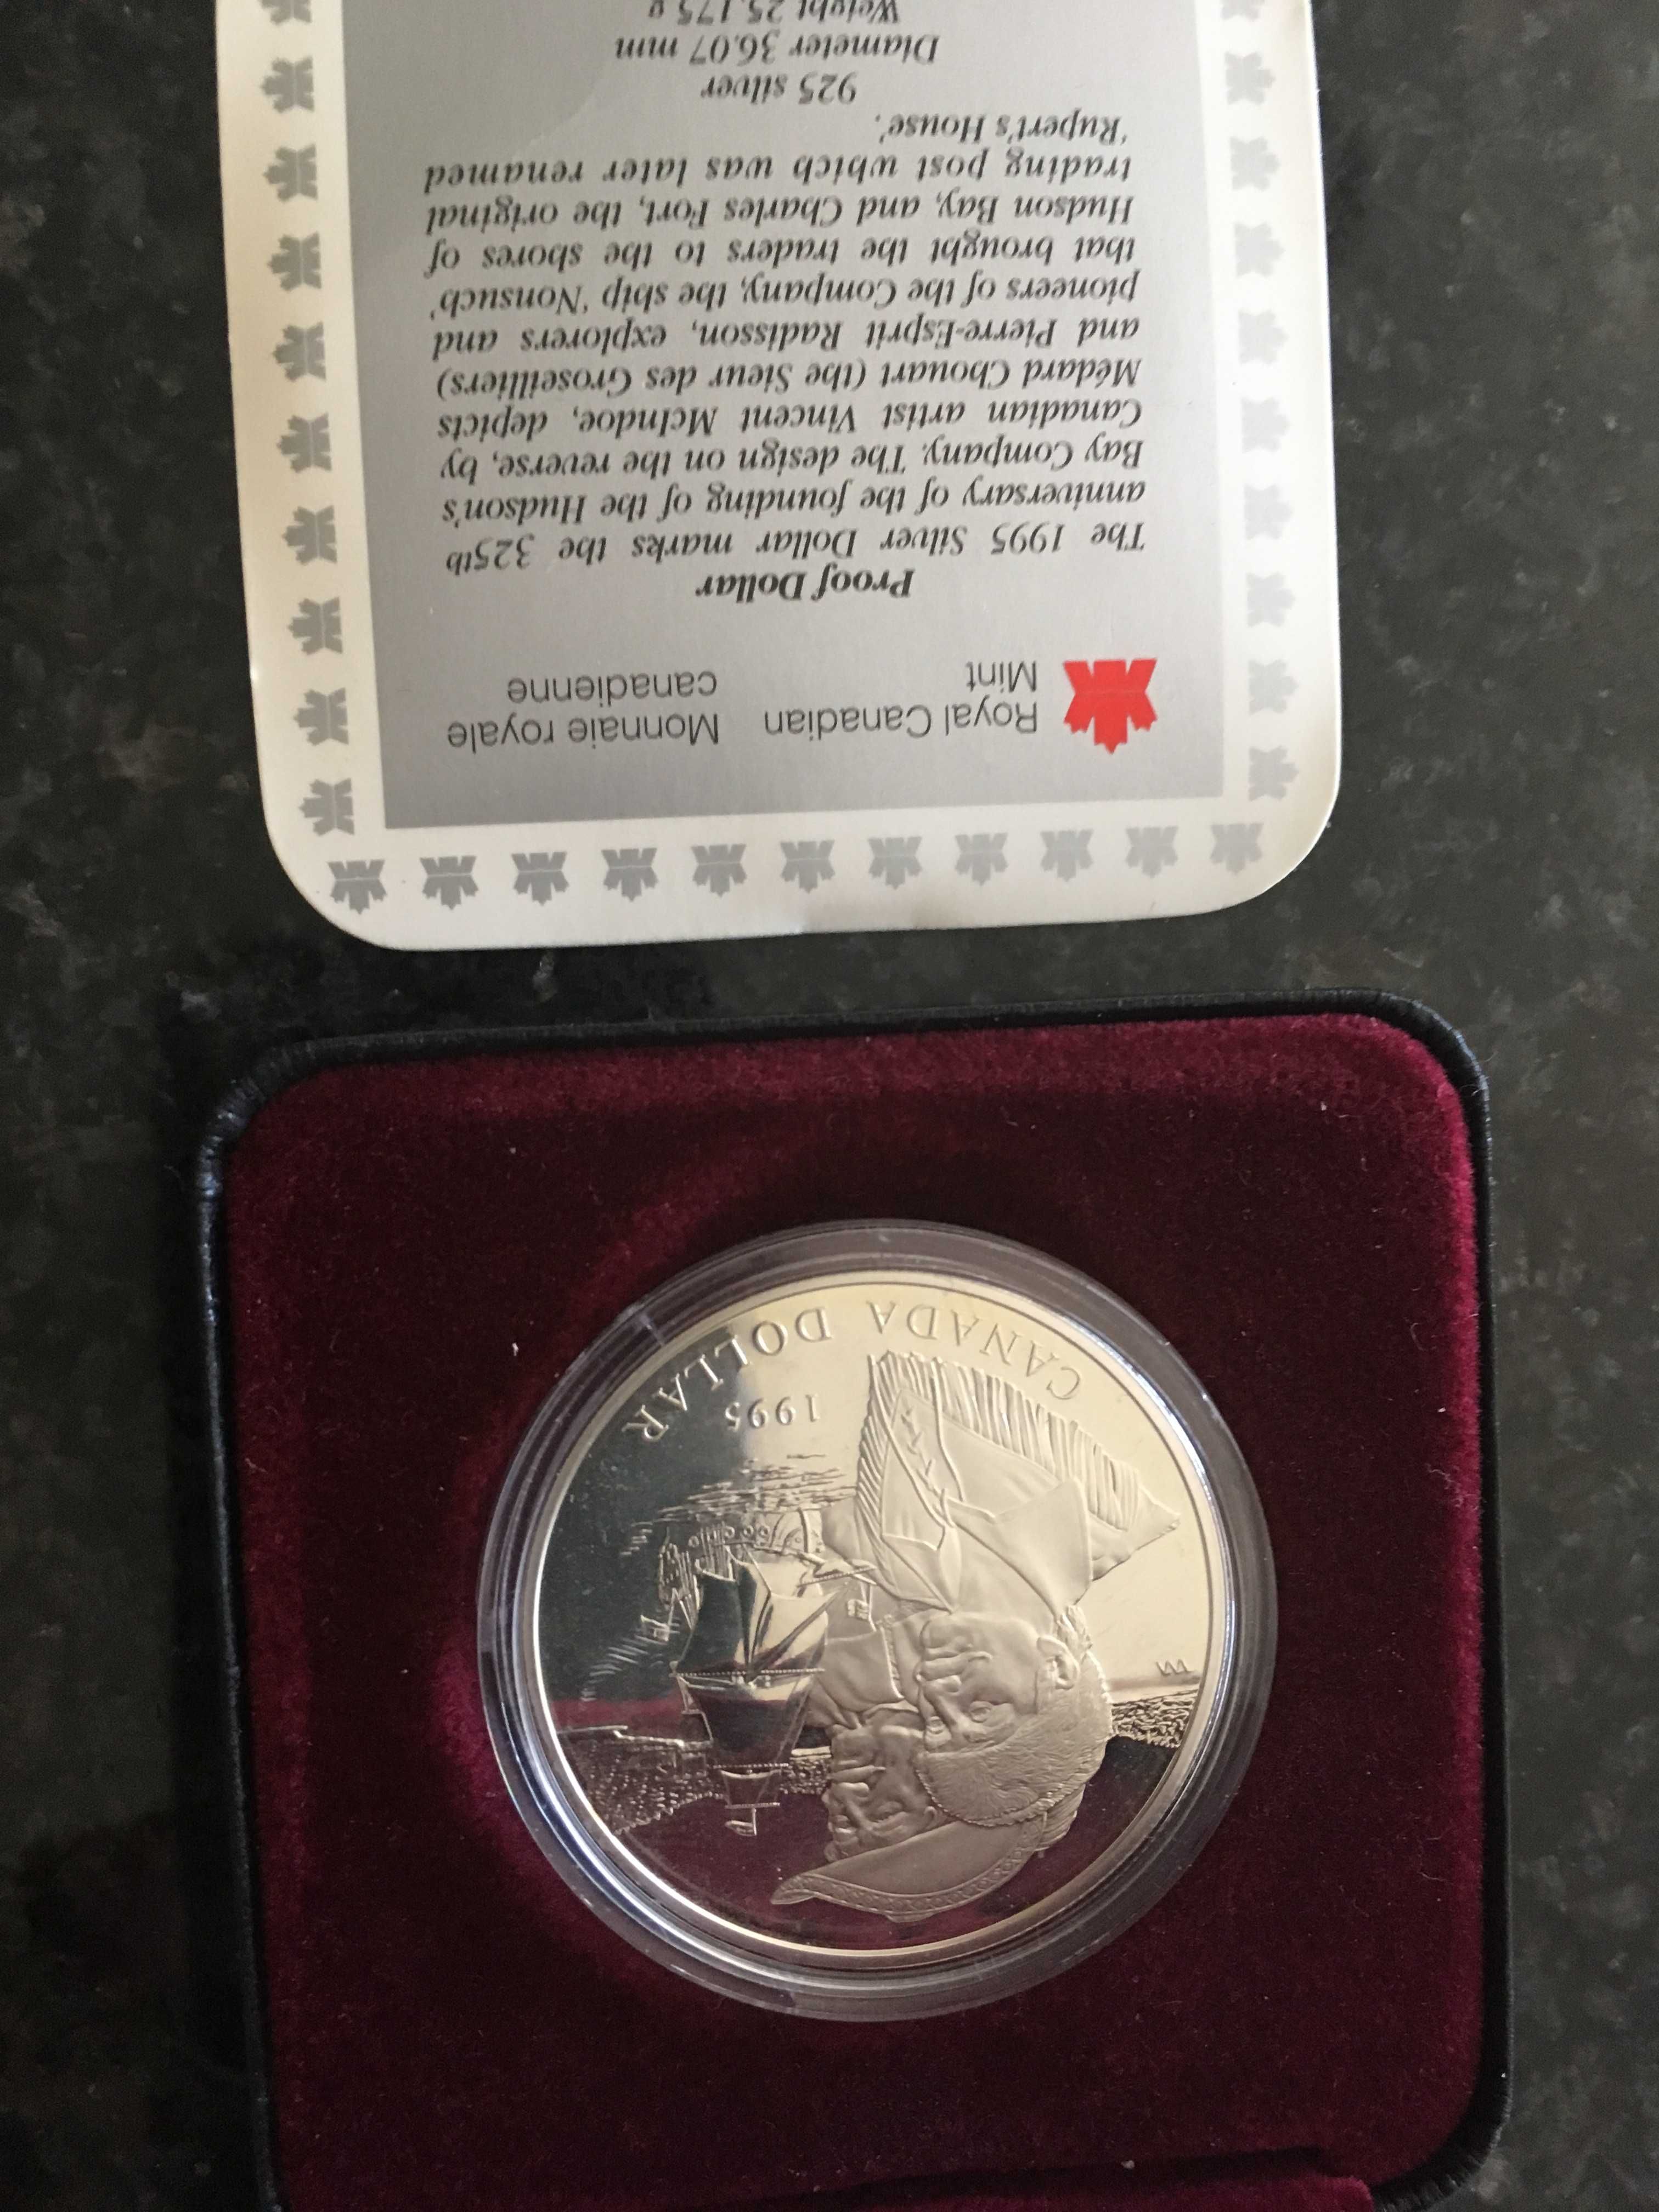 1995 Proof dollar silver 925 after - royal canadian mint